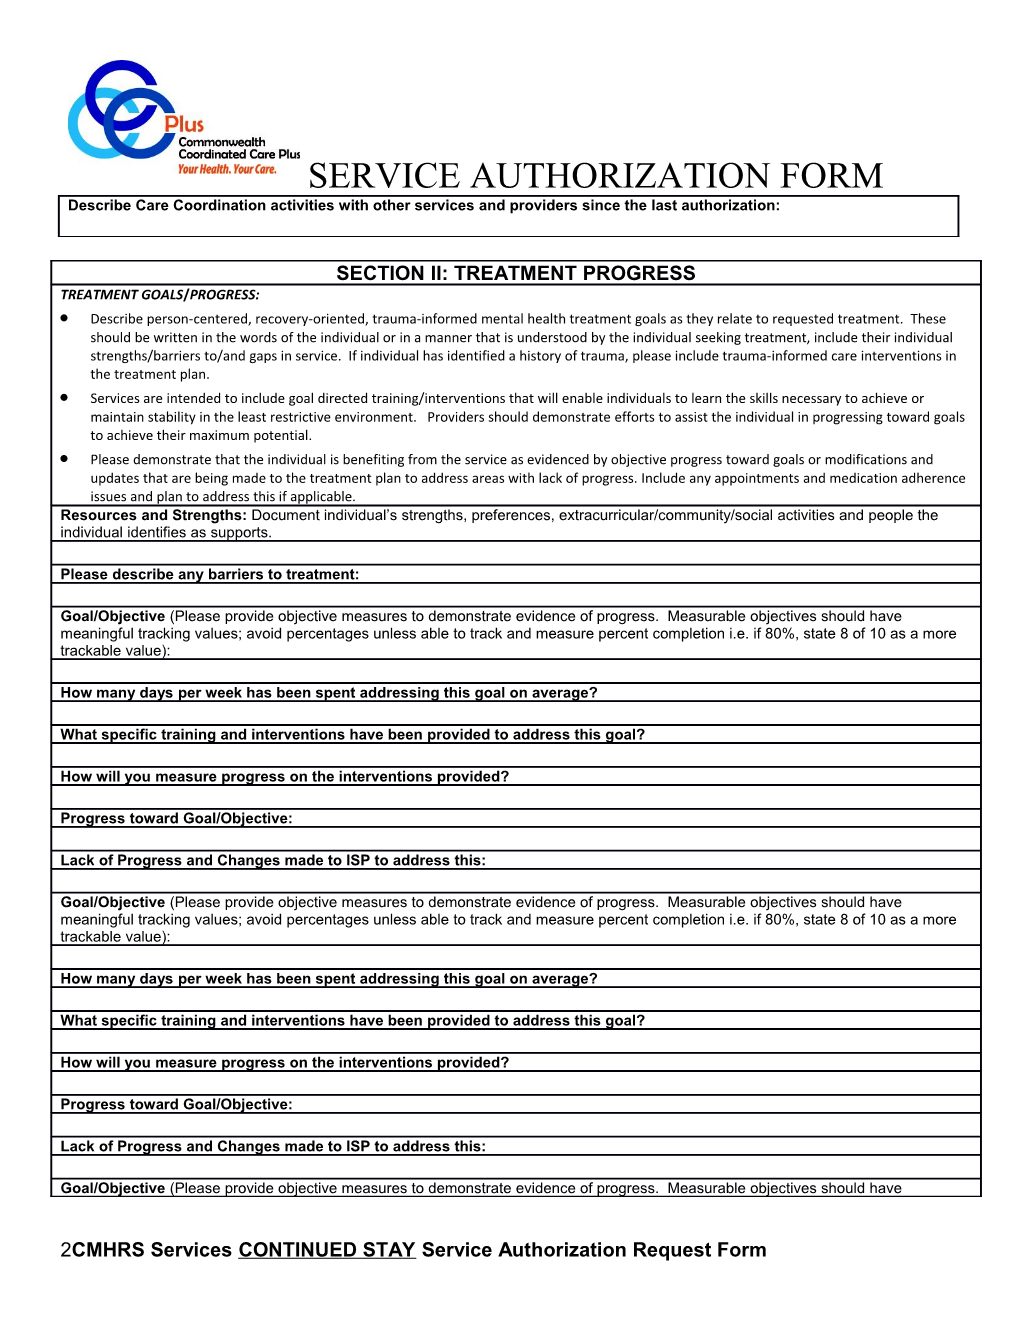 CMHRS & Behavior Therapy Services CONTINUED STAY Service Authorization Request Form